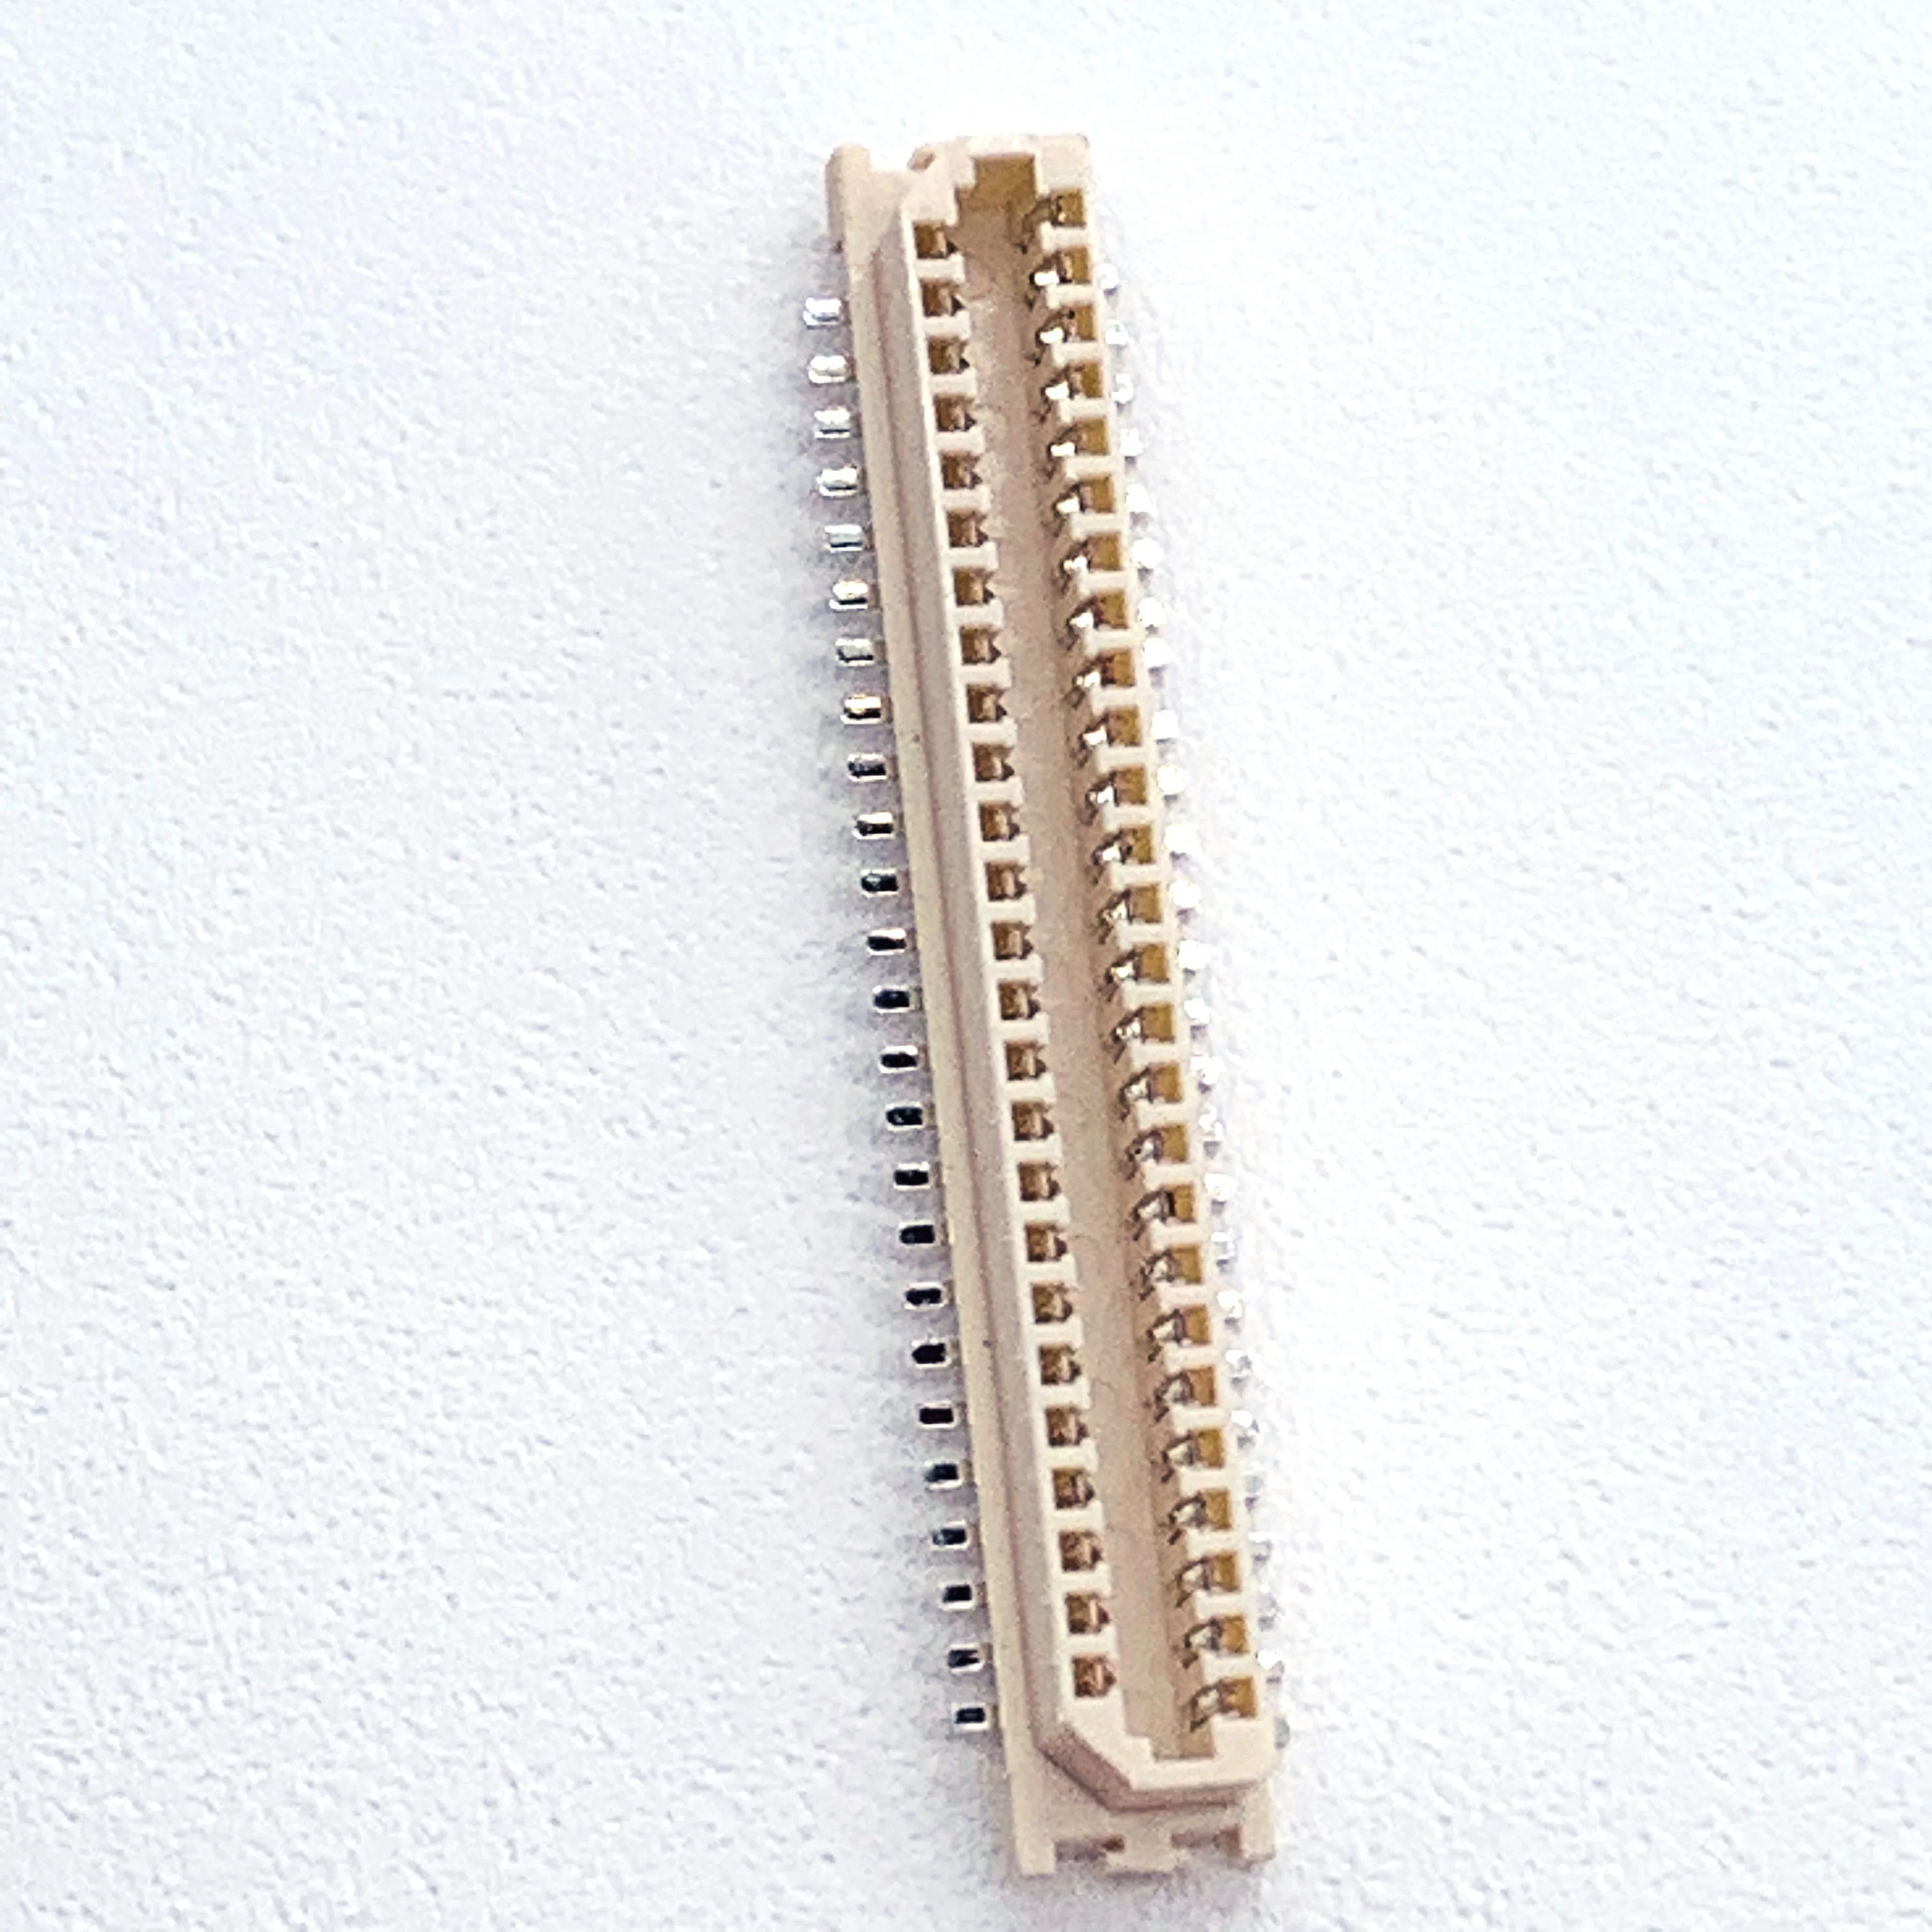 High Quality Conductivity Board To Board Connector for Connect Printed Circuit Boards